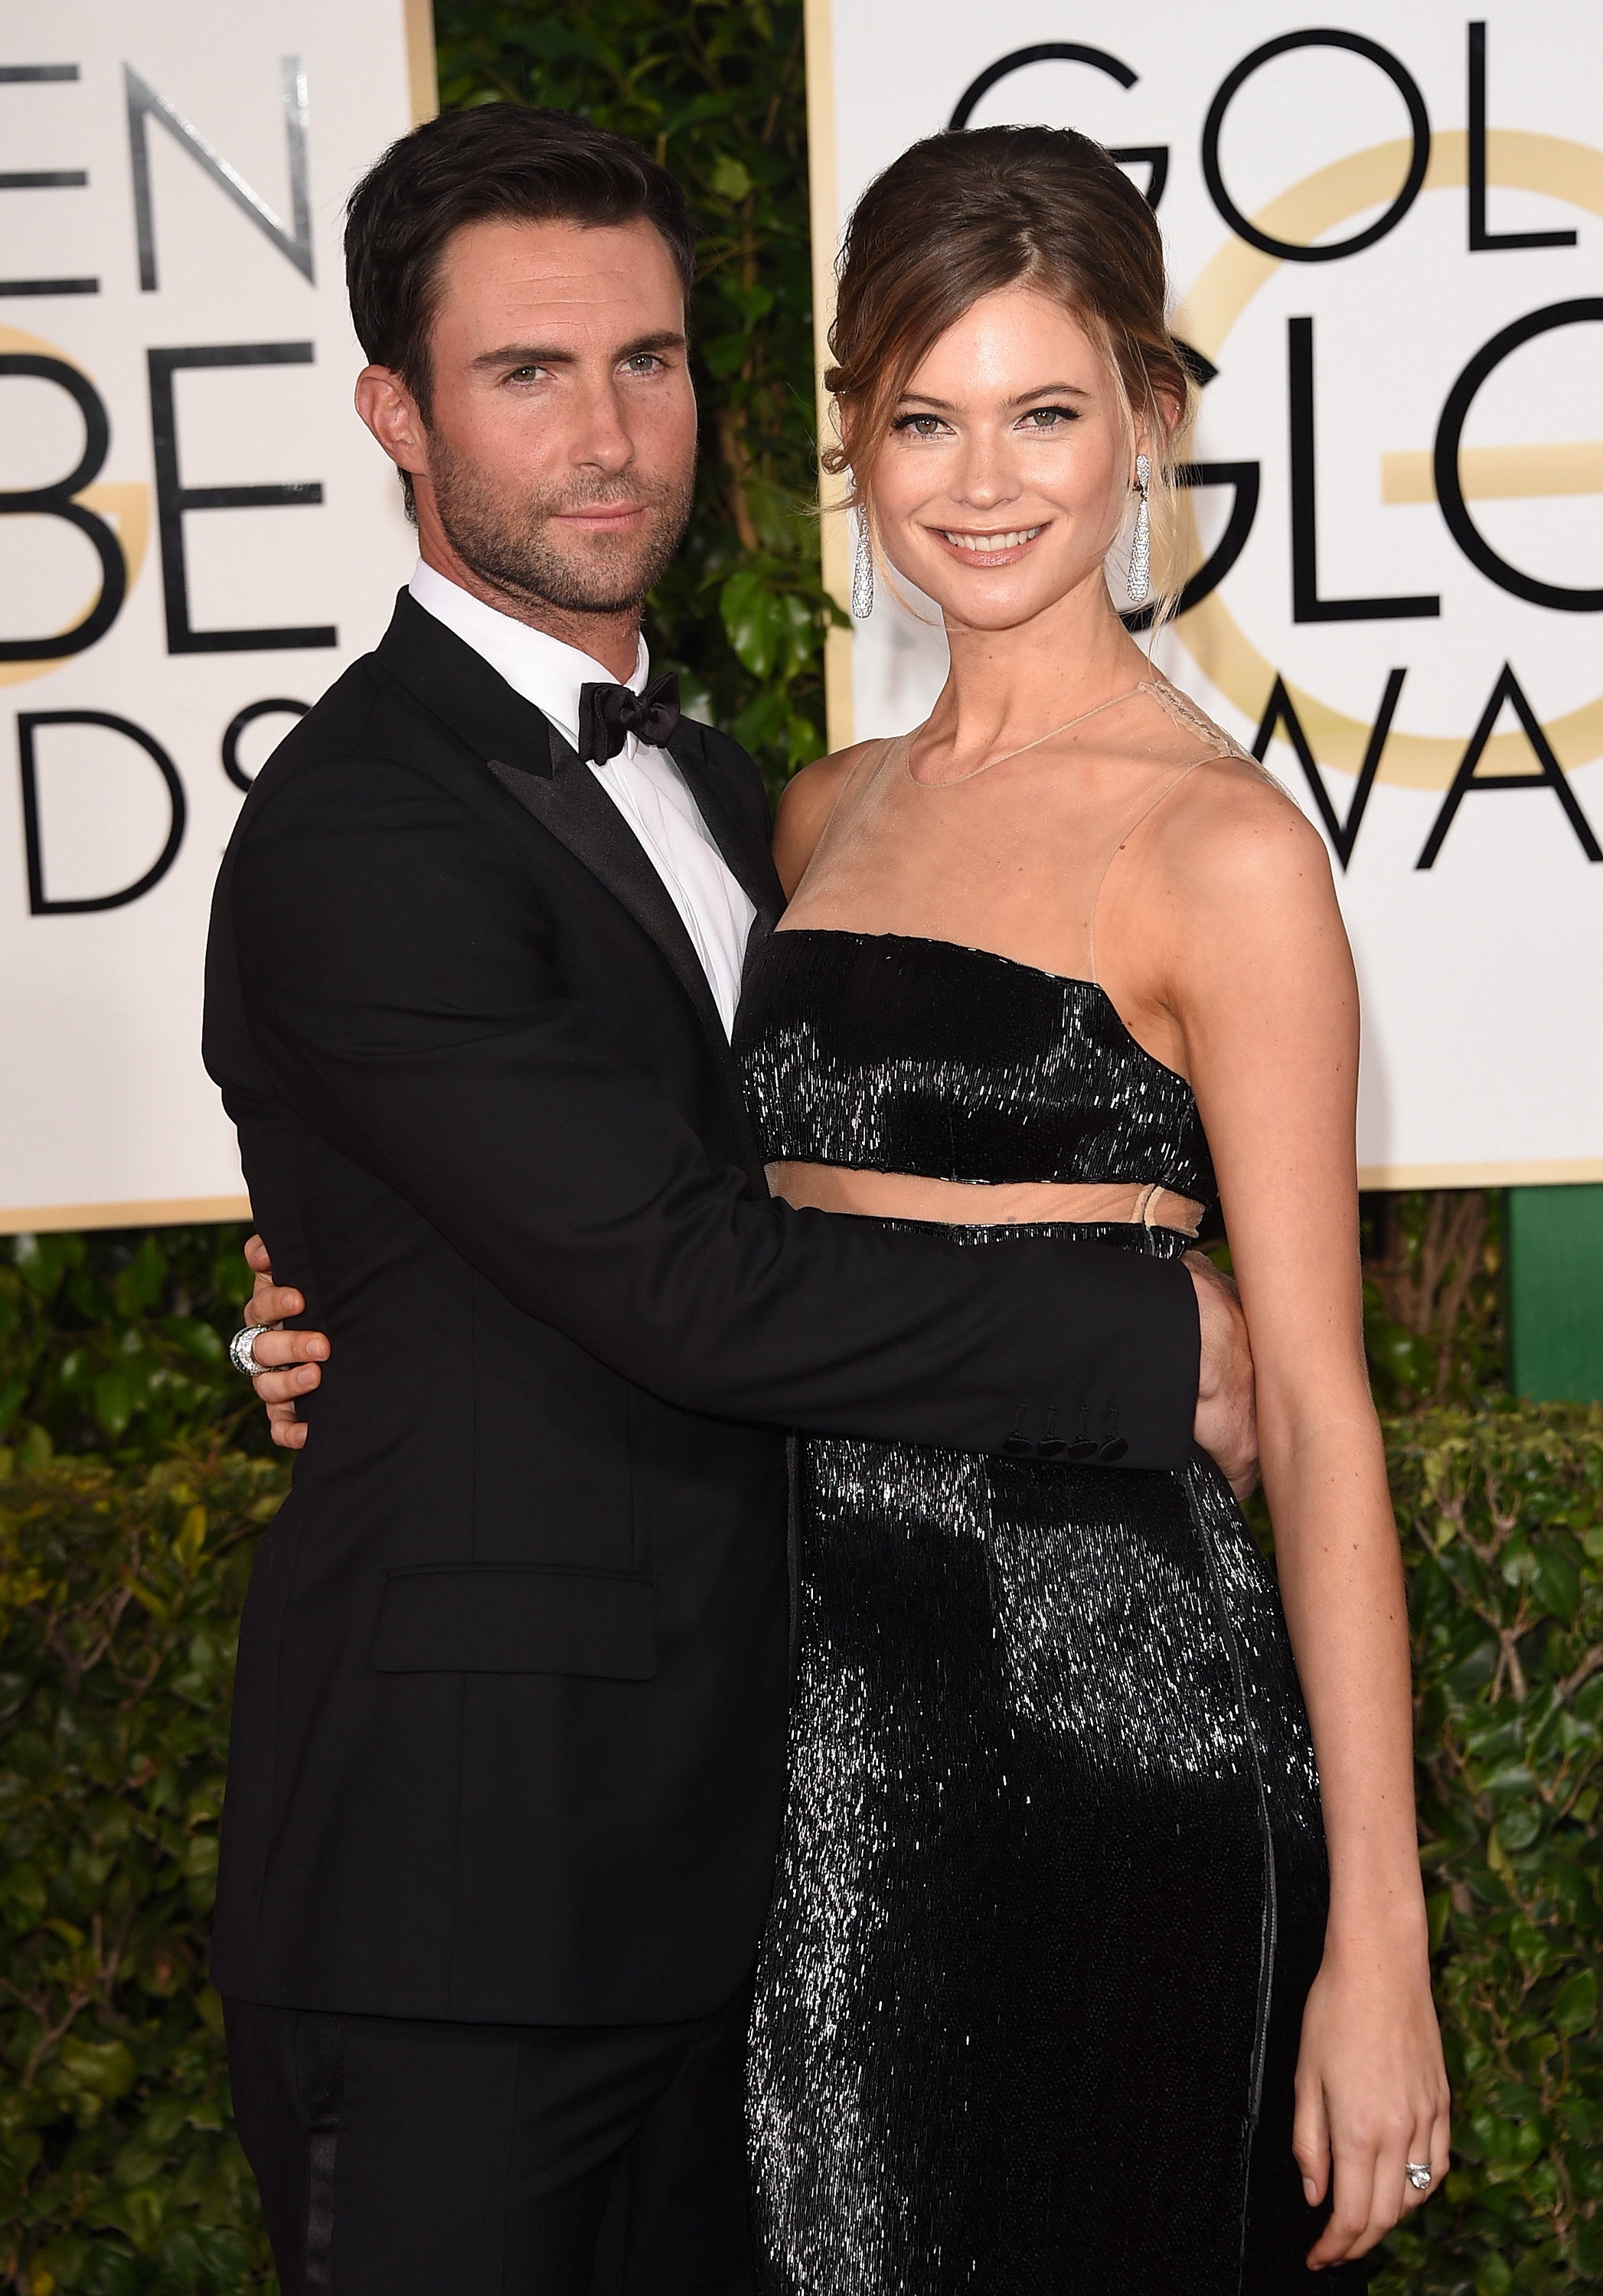 Adam Levine and Behati Prinsloo at The Beverly Hilton Hotel on January 11, 2015 in Beverly Hills, California.